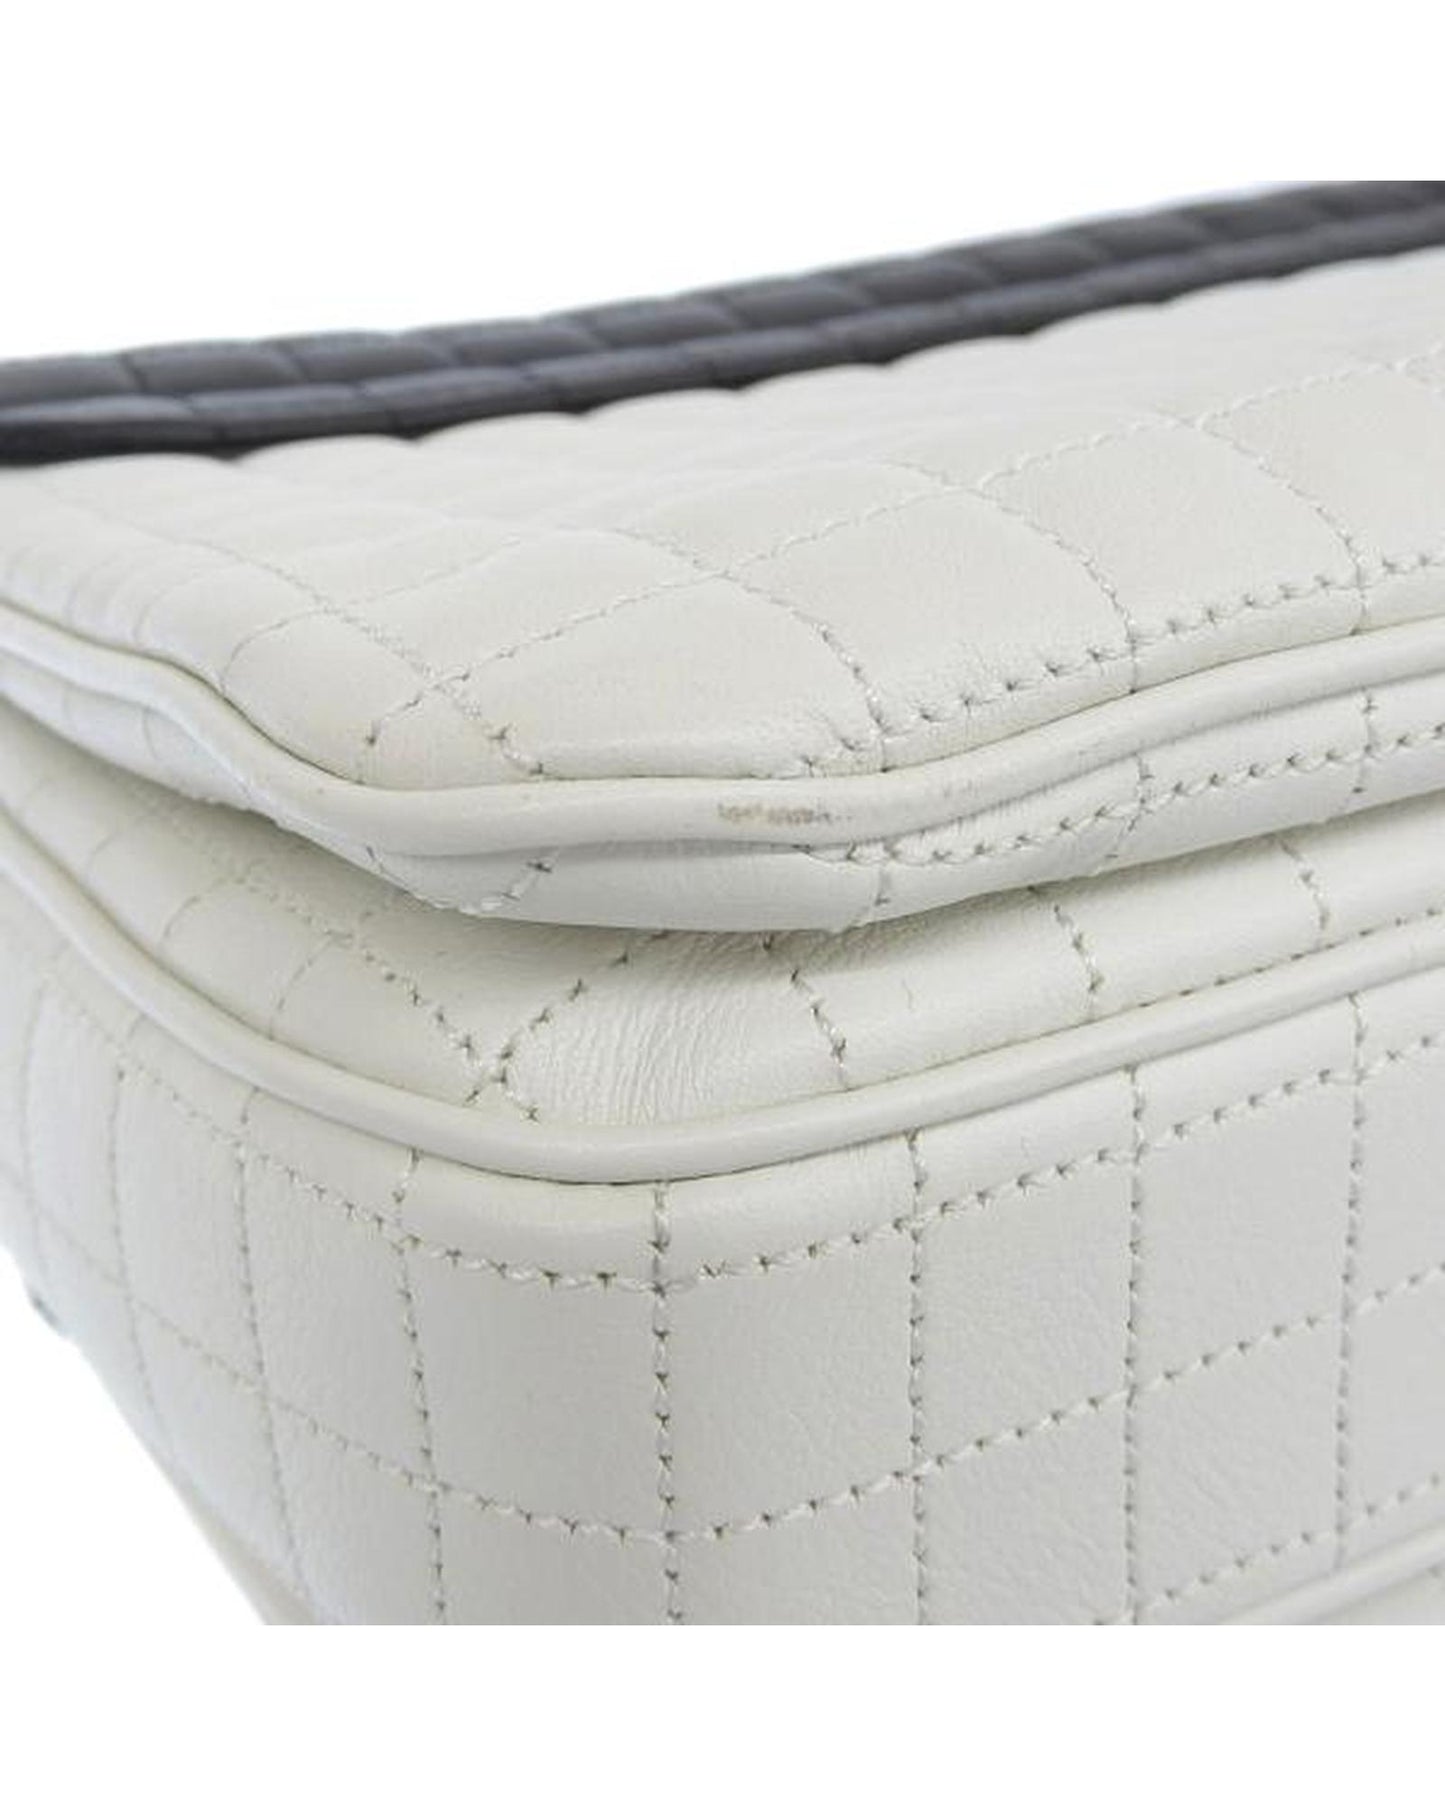 Celine Women's Quilted Leather Shoulder Bag with Bicolor Detailing in White